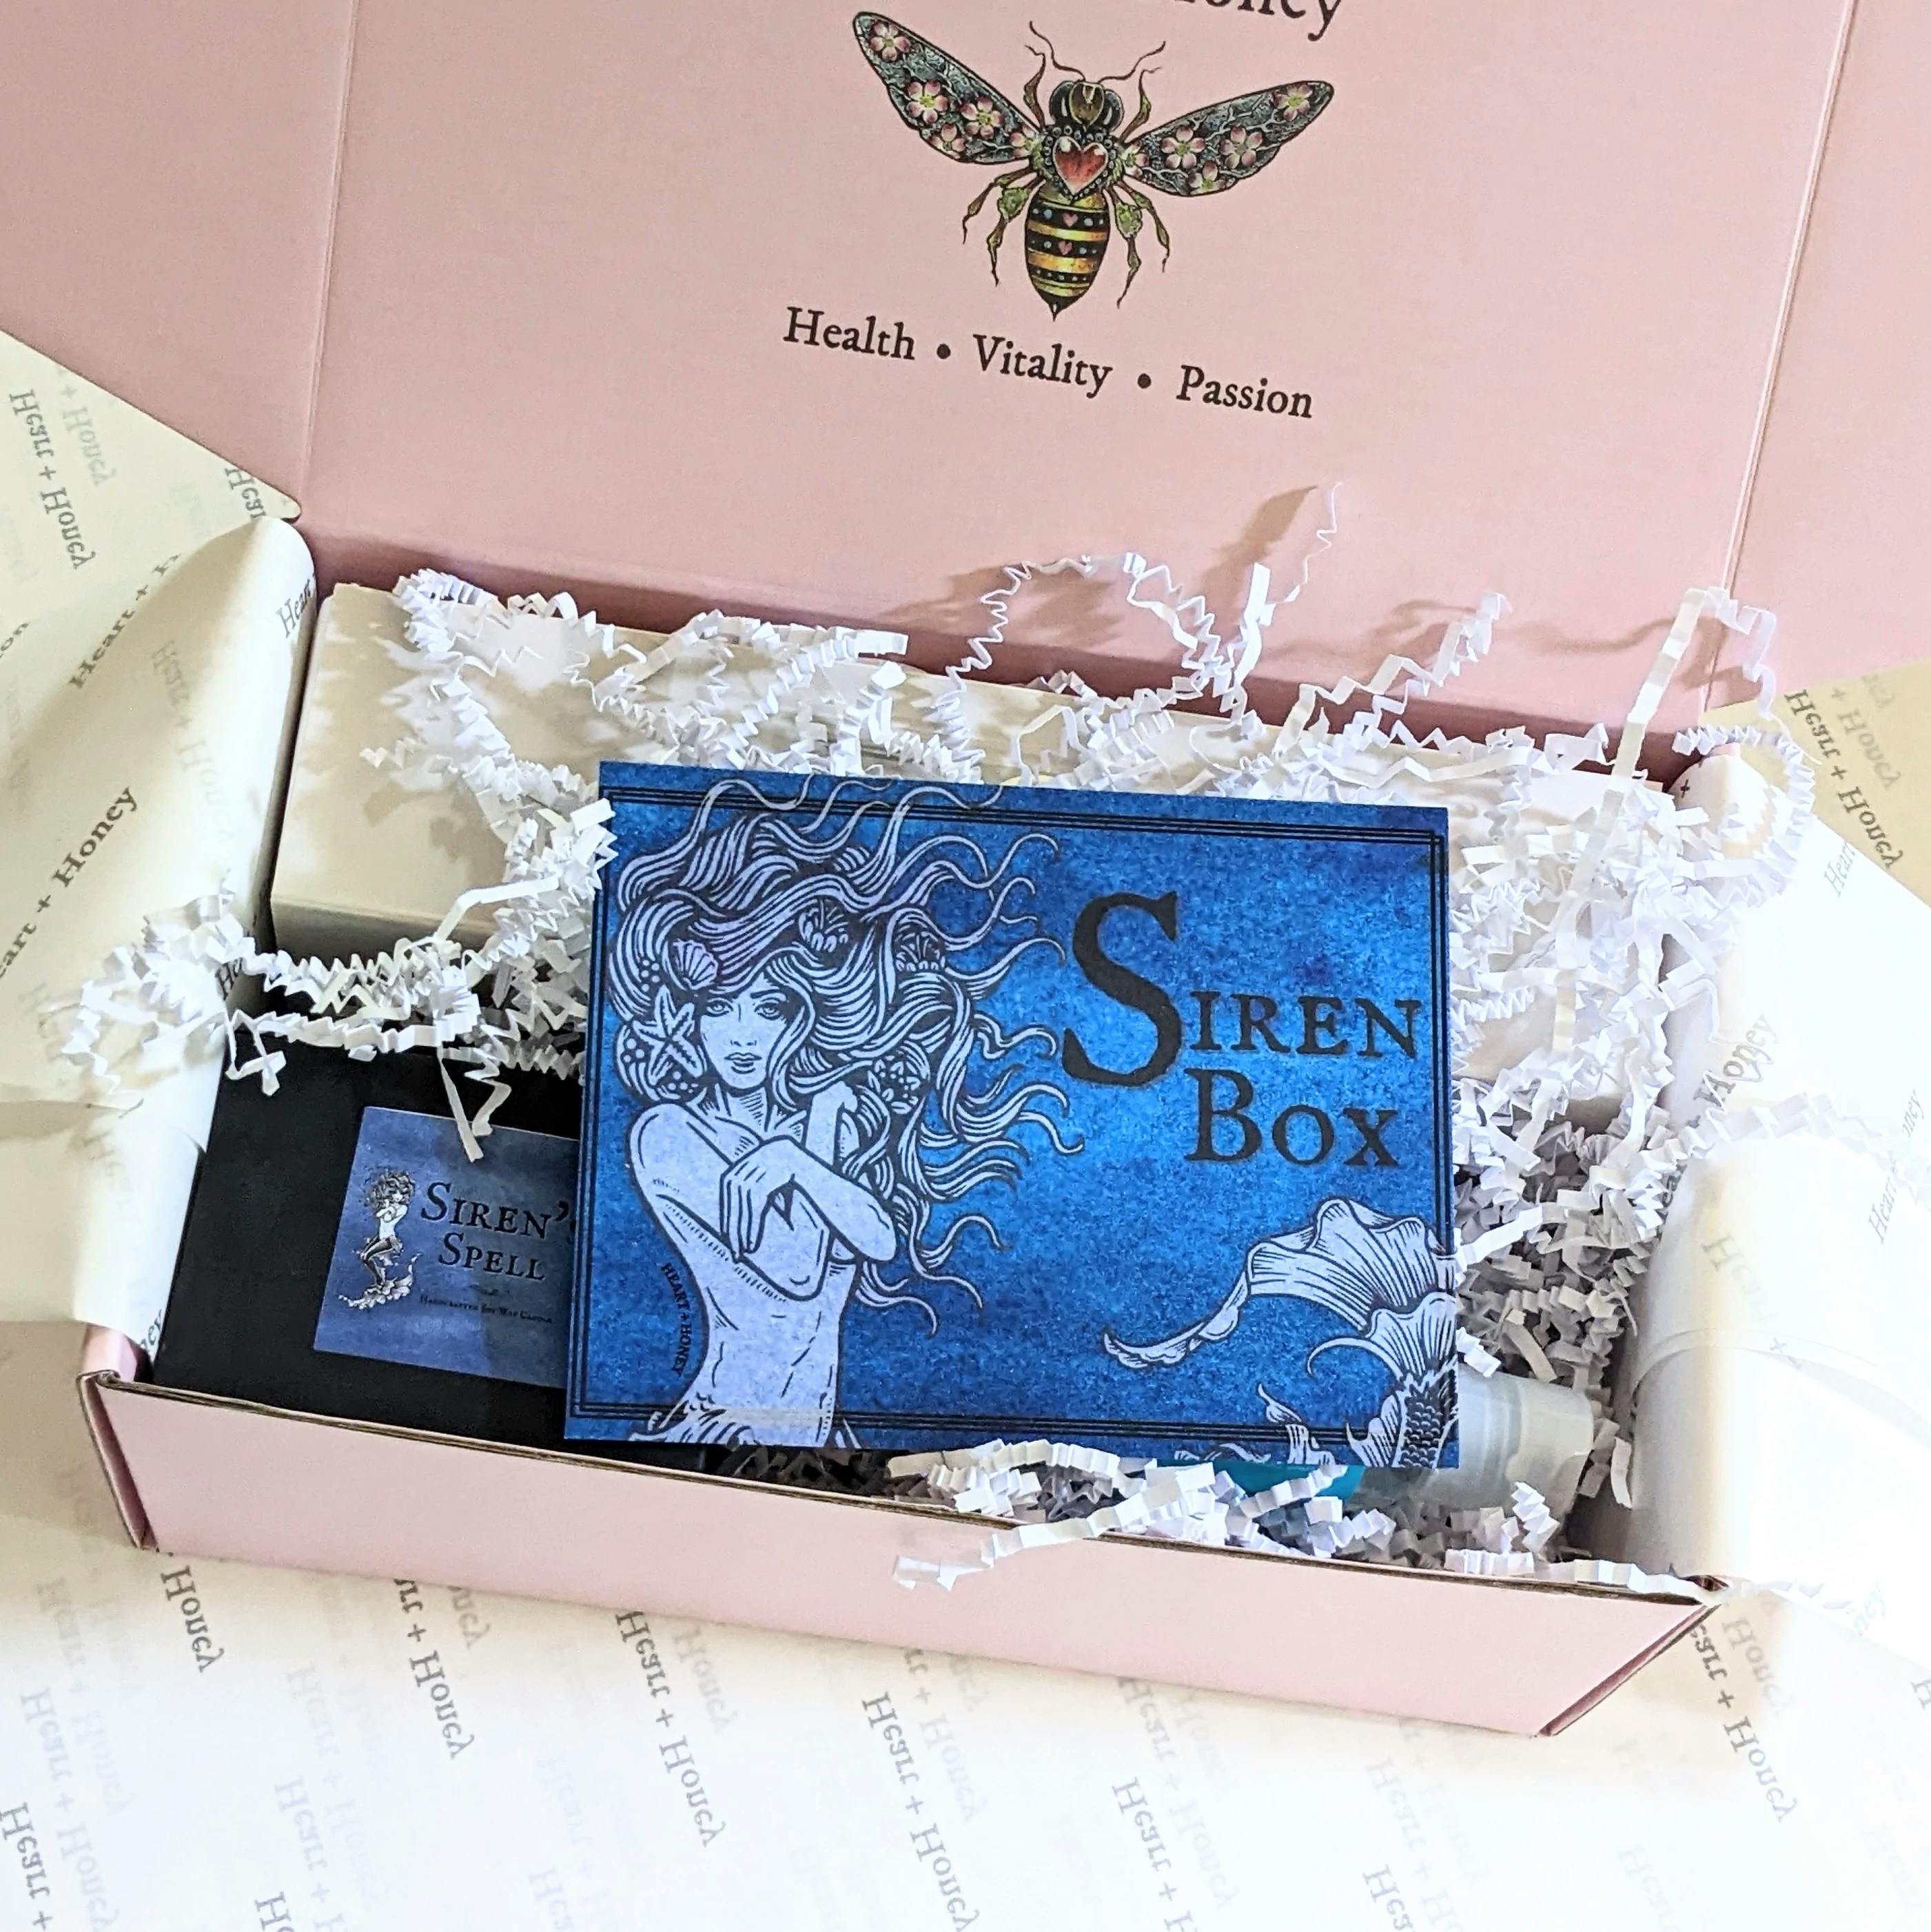 Heart + Honey Siren Box opened with contents showing